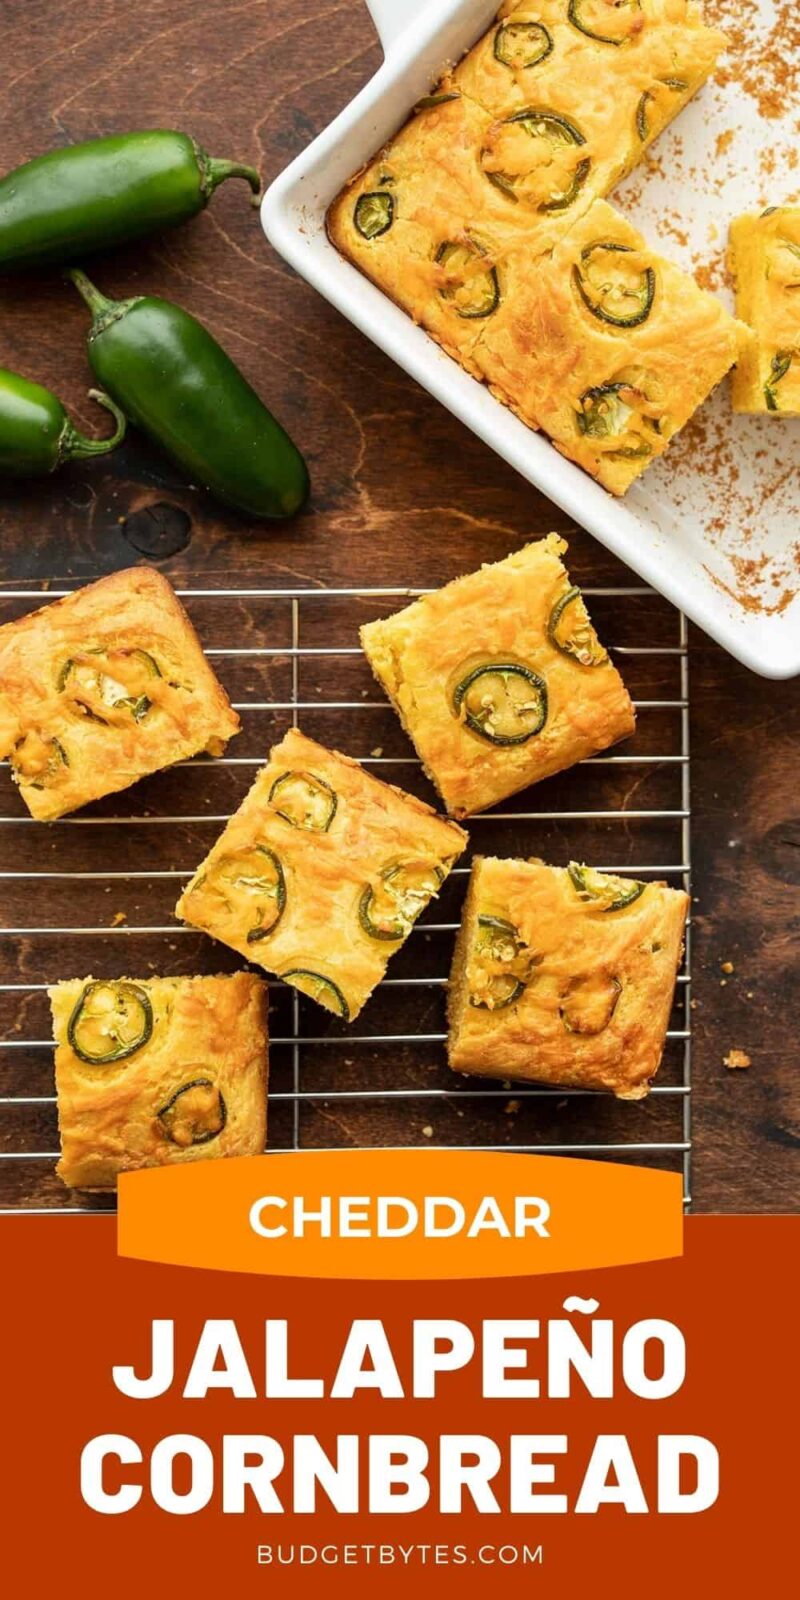 Jalapeño Cheddar Cornbread half in the baking dish, half on a cooling rack, title text at the bottom